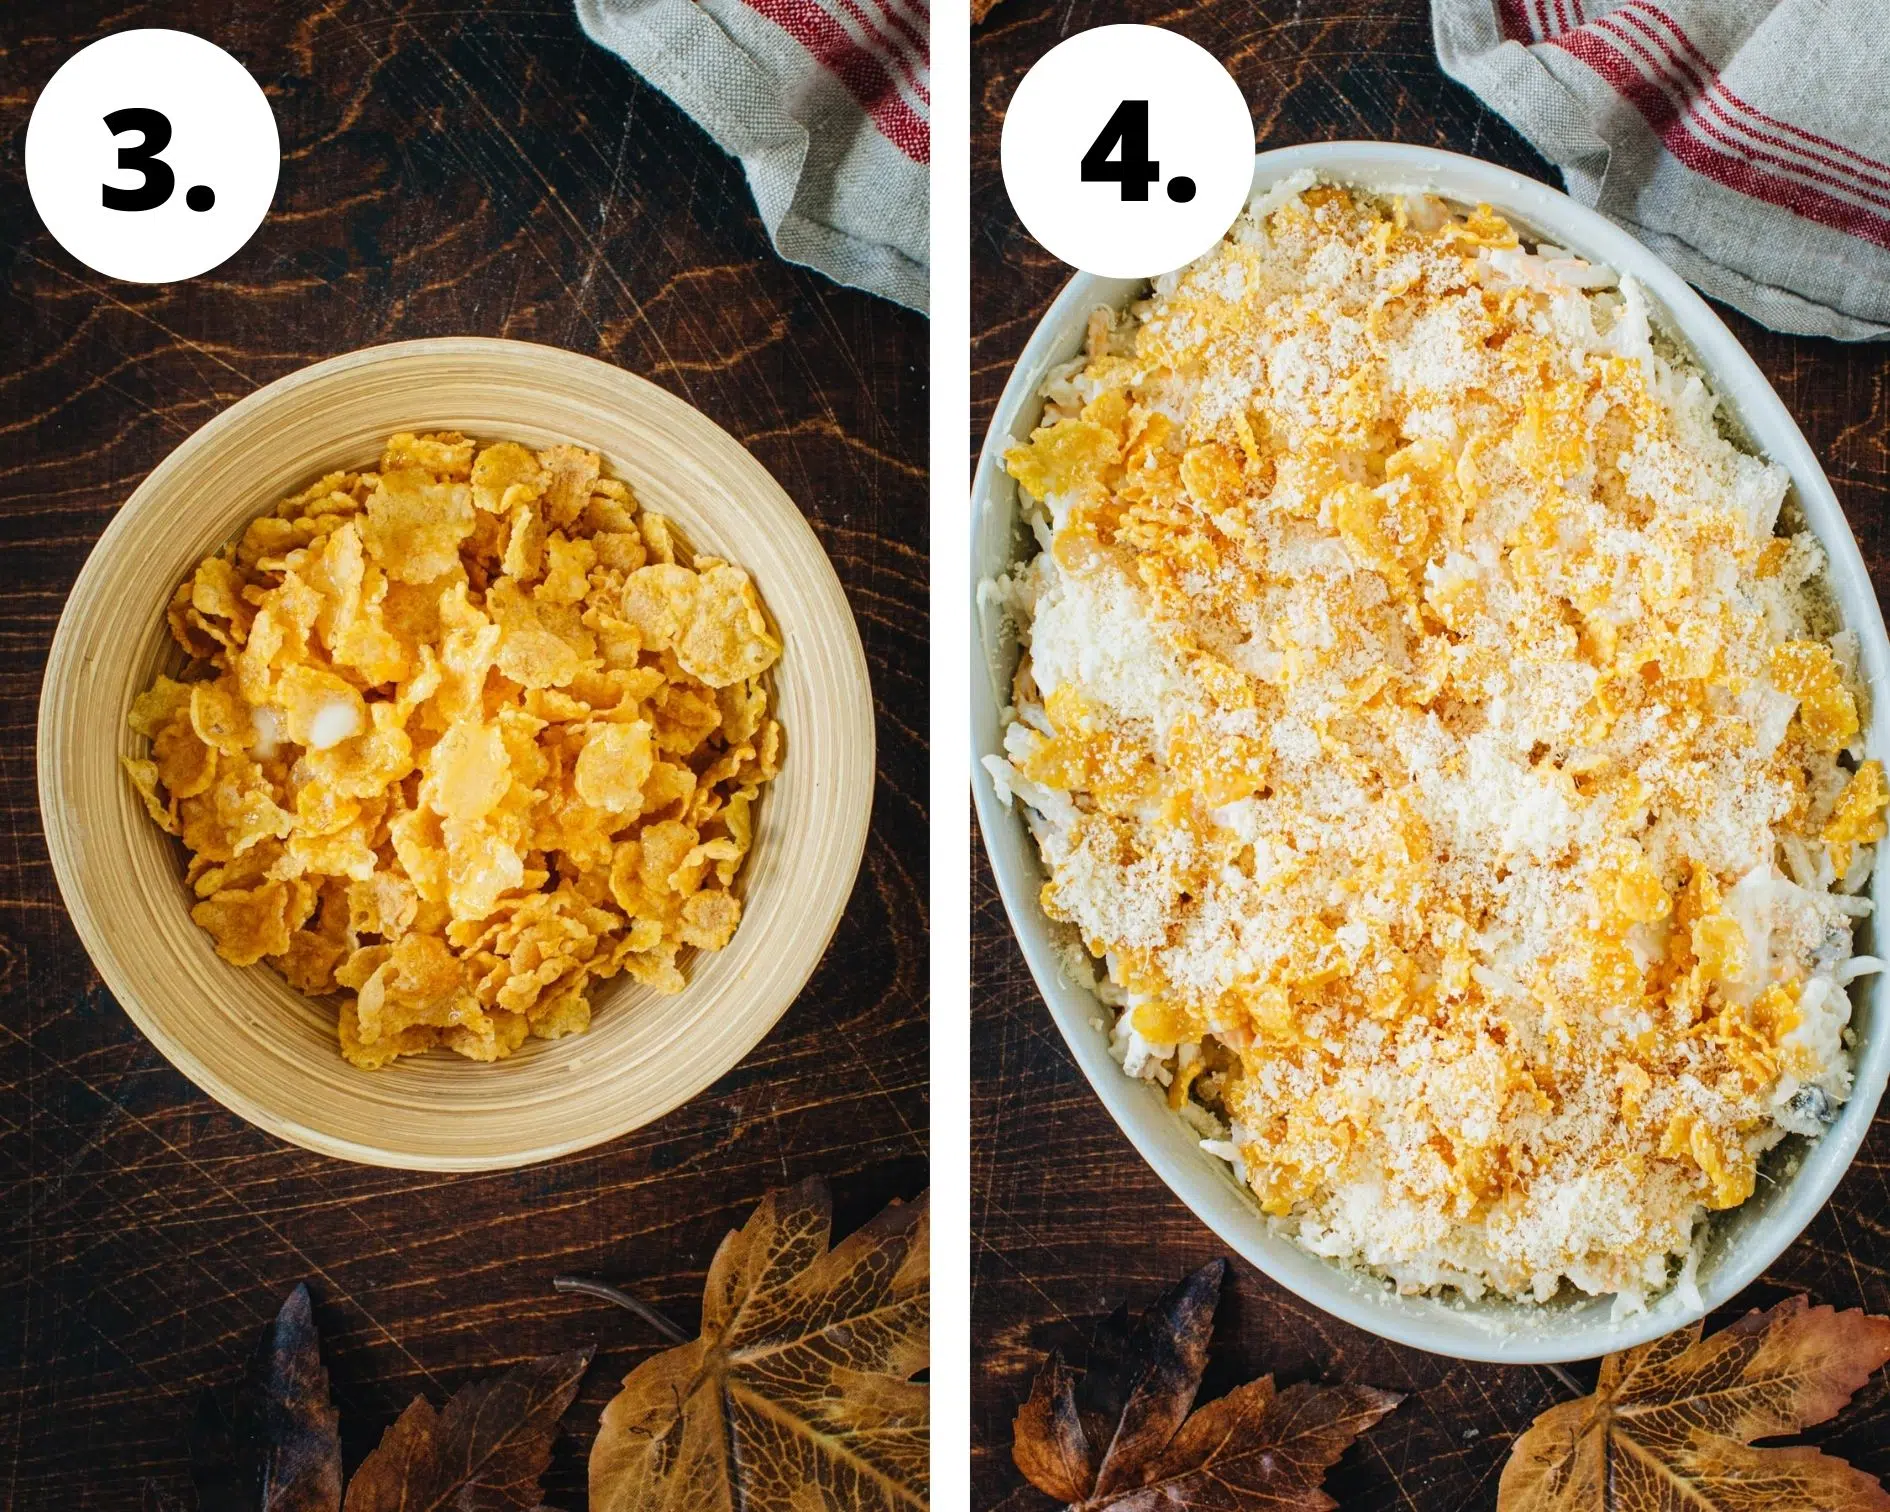 Cheesy hashbrown casserole process steps 3 and 4.